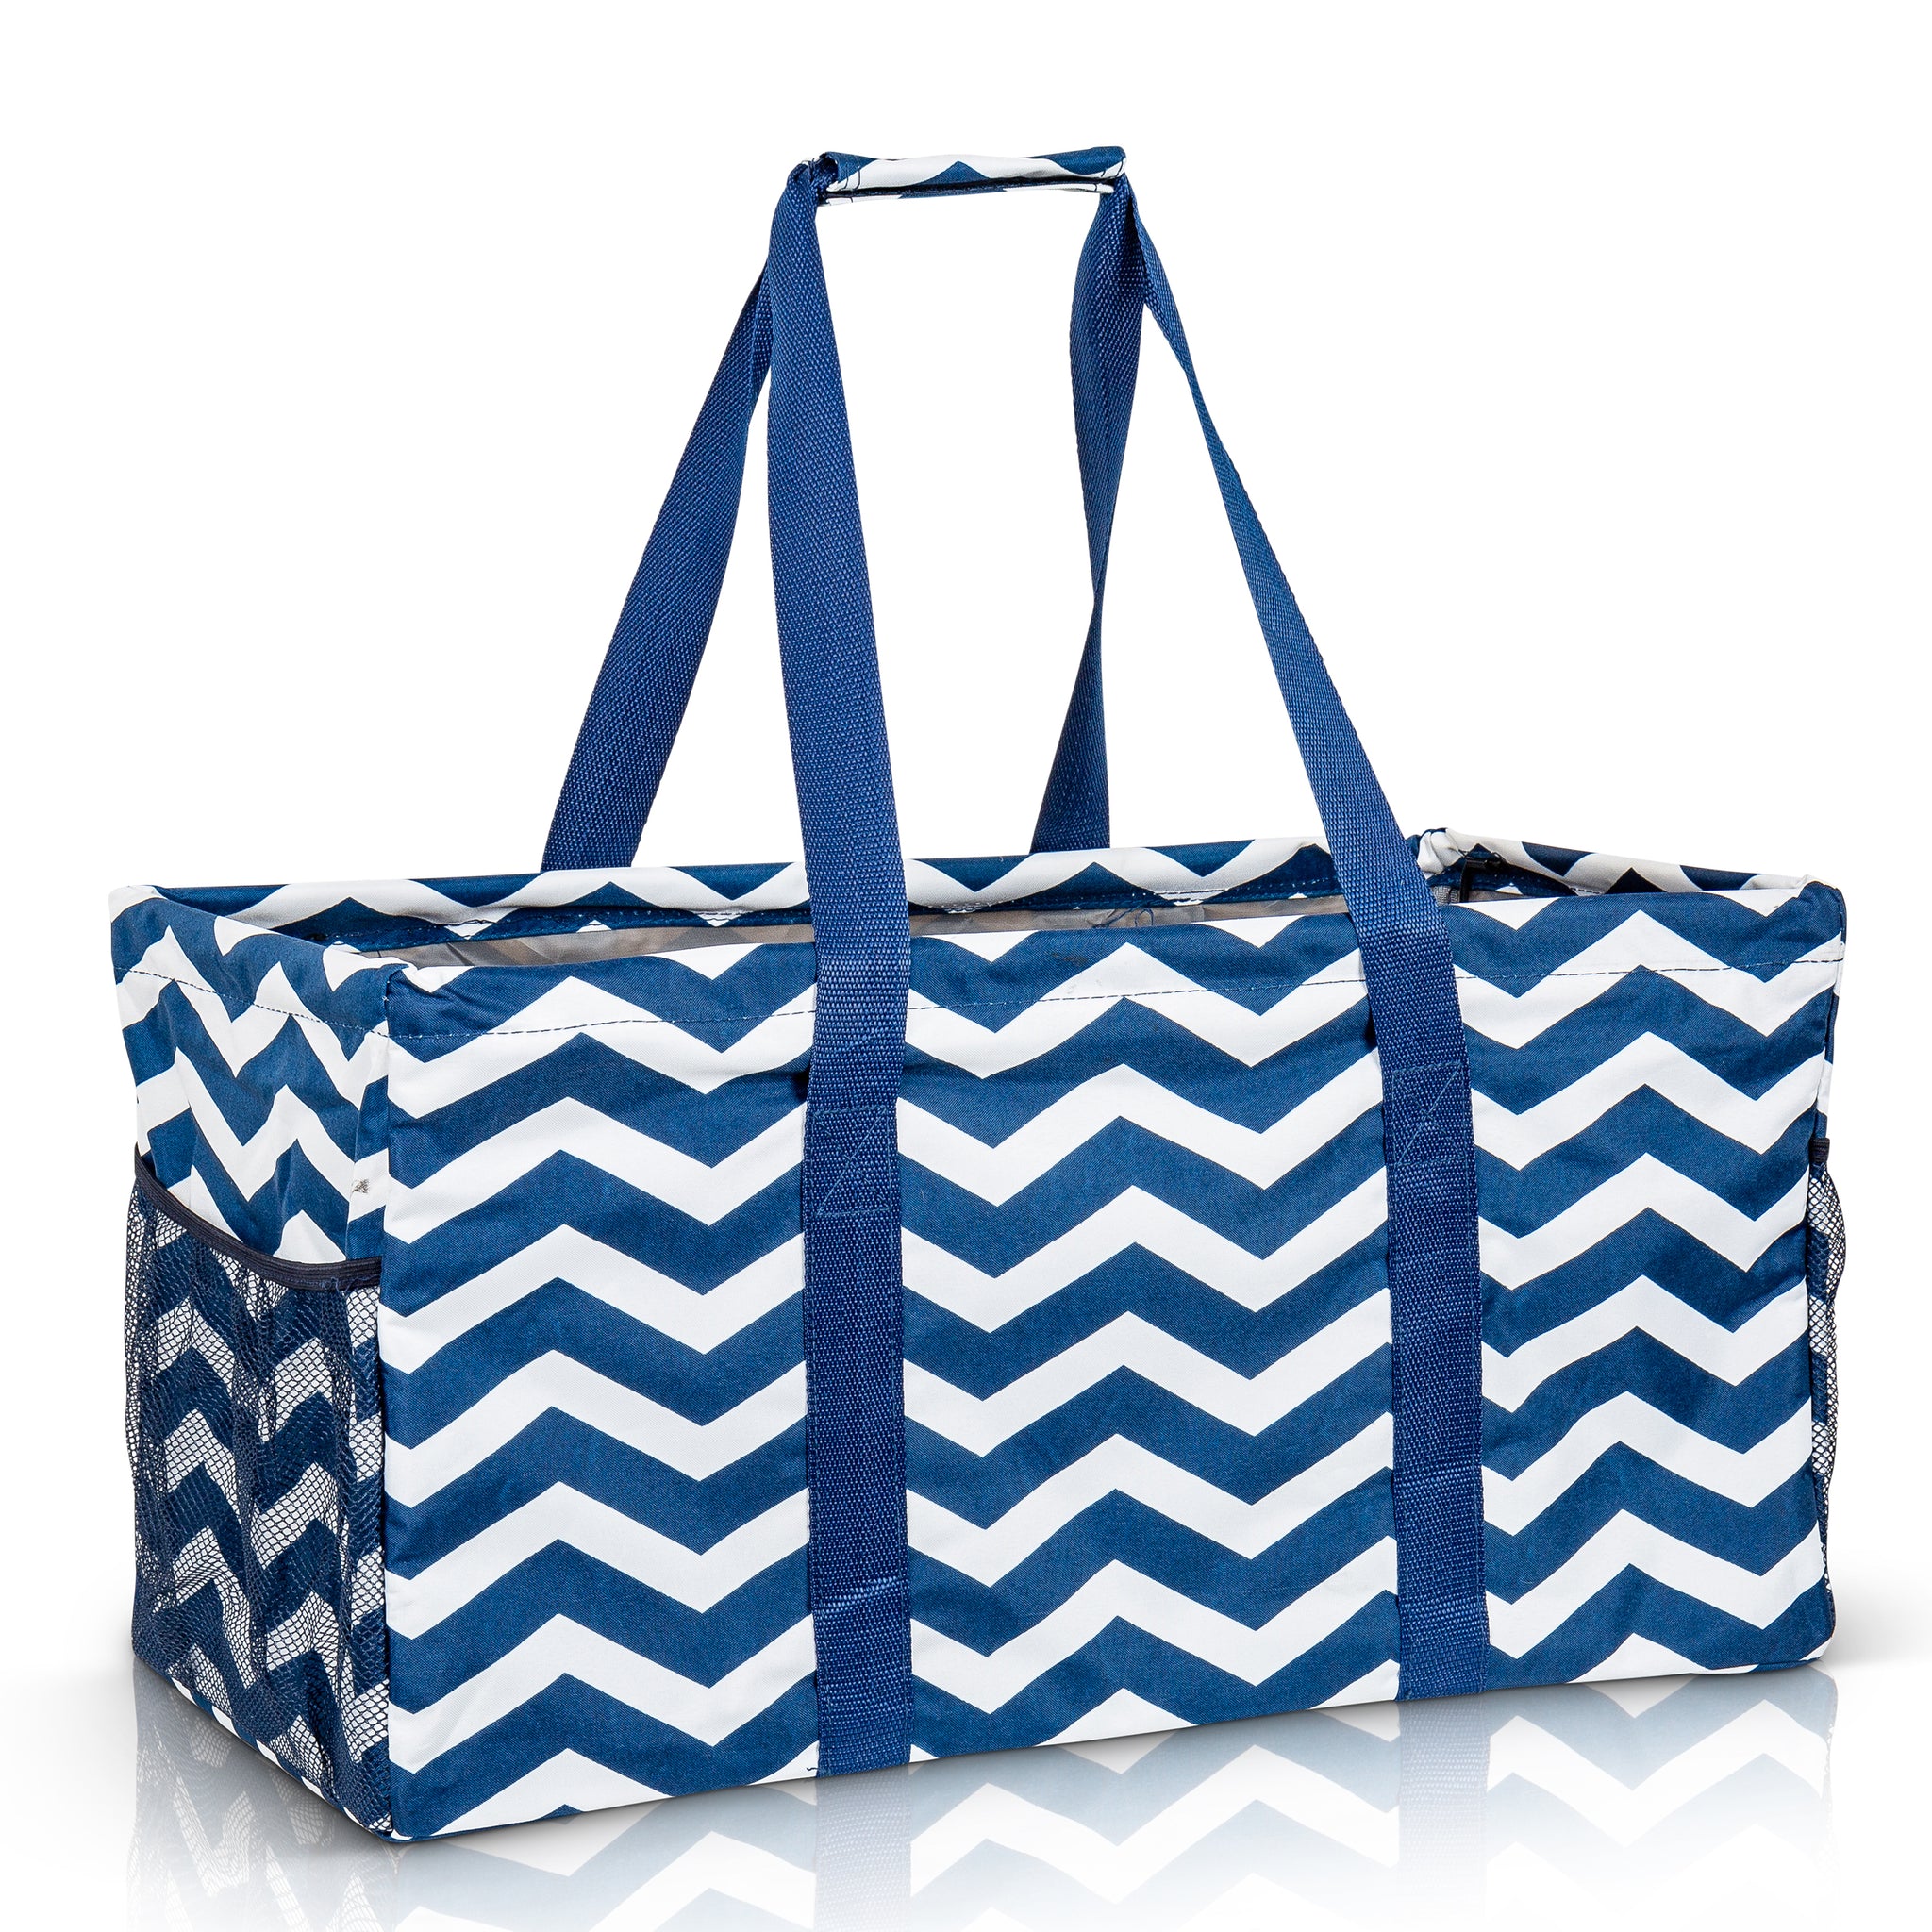 Lucazzi Extra Large Utility Tote Bag - Oversized Collapsible Reusable